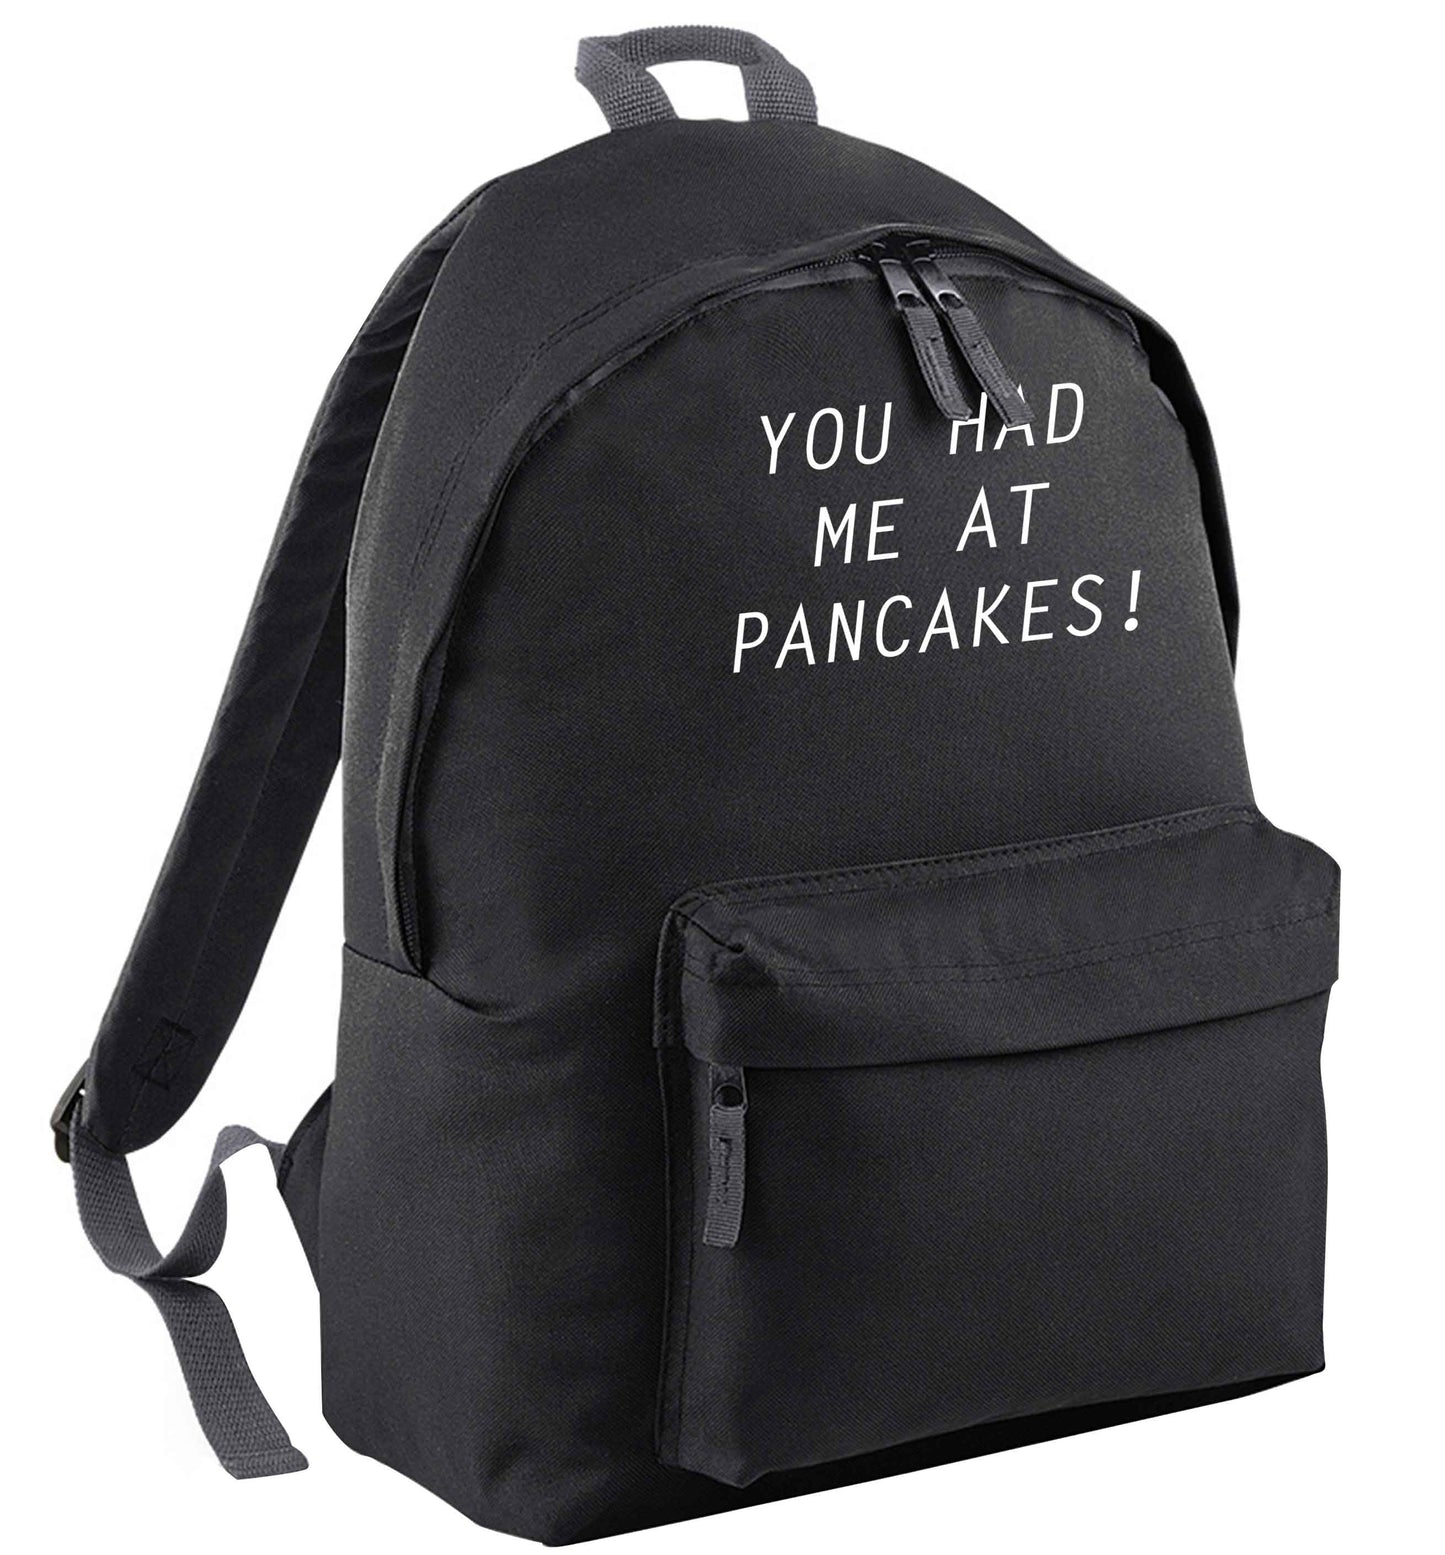 You had me at pancakes | Children's backpack